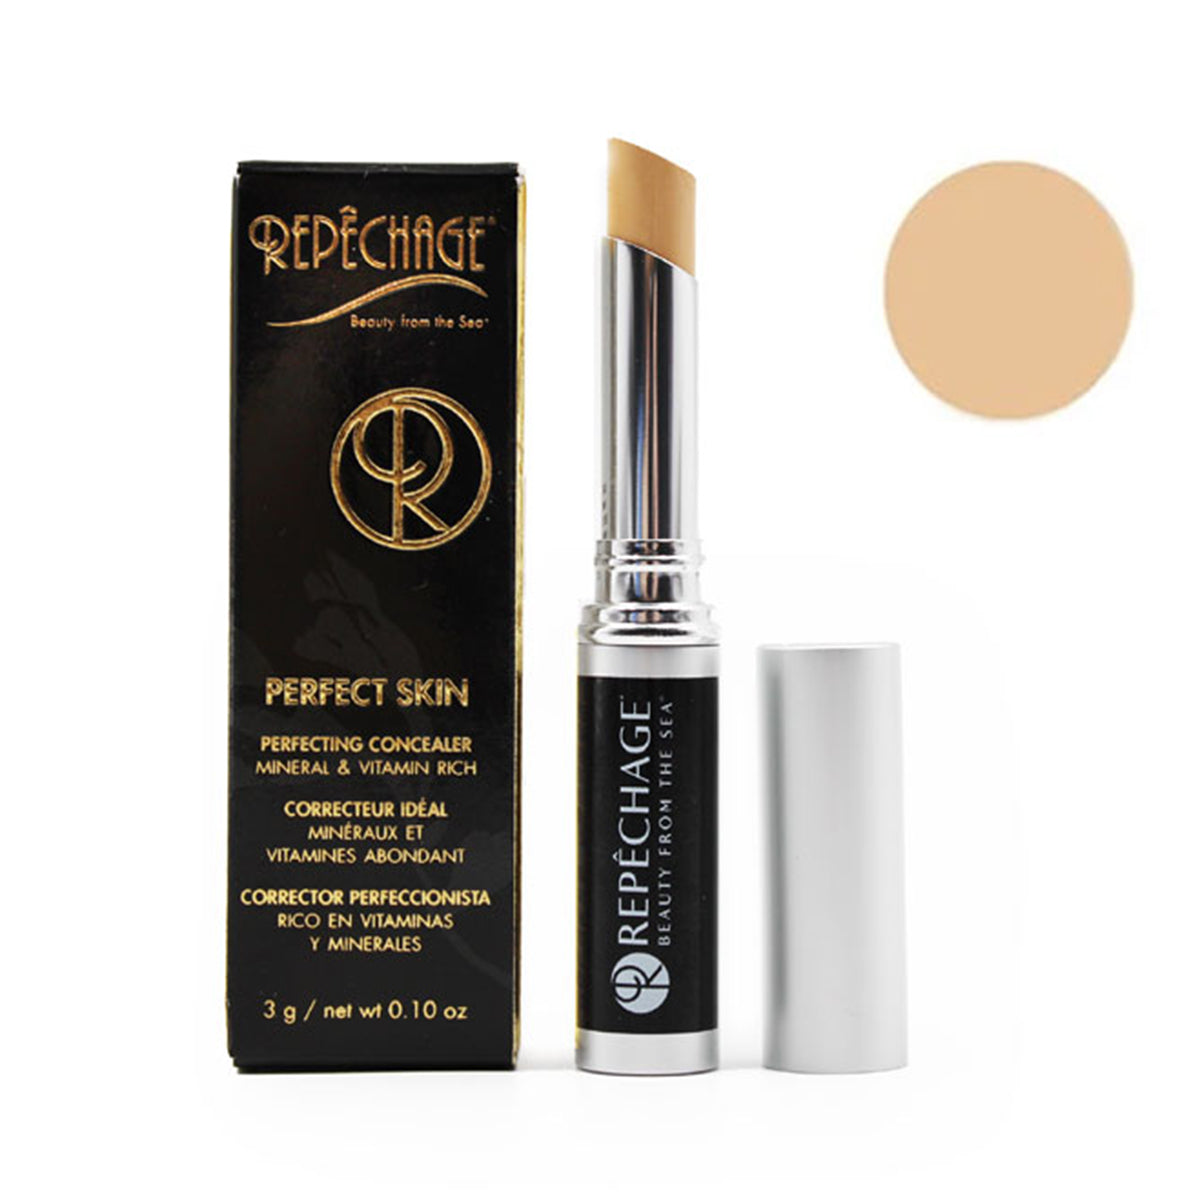 Perfect Skin Perfecting Concealer - Light and packaging